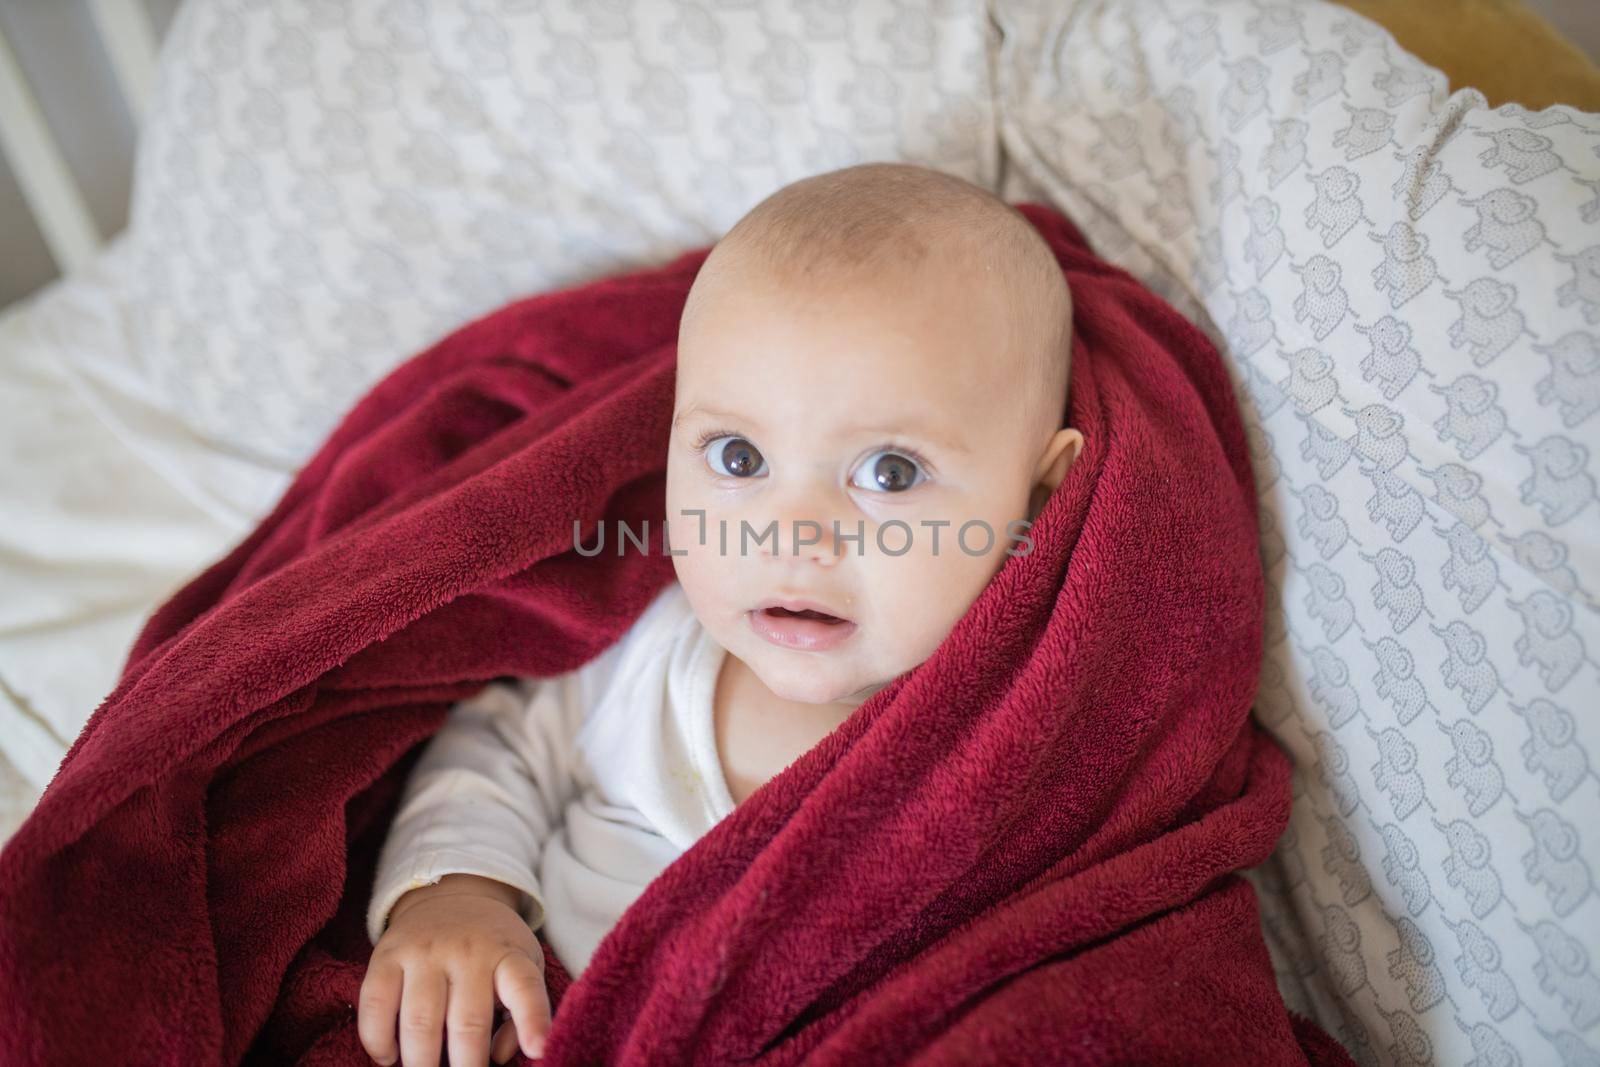 Adorable and concerned baby covered with red blanket and lying on bed. Cute calm baby resting on pillows. Toddles and babies on beds